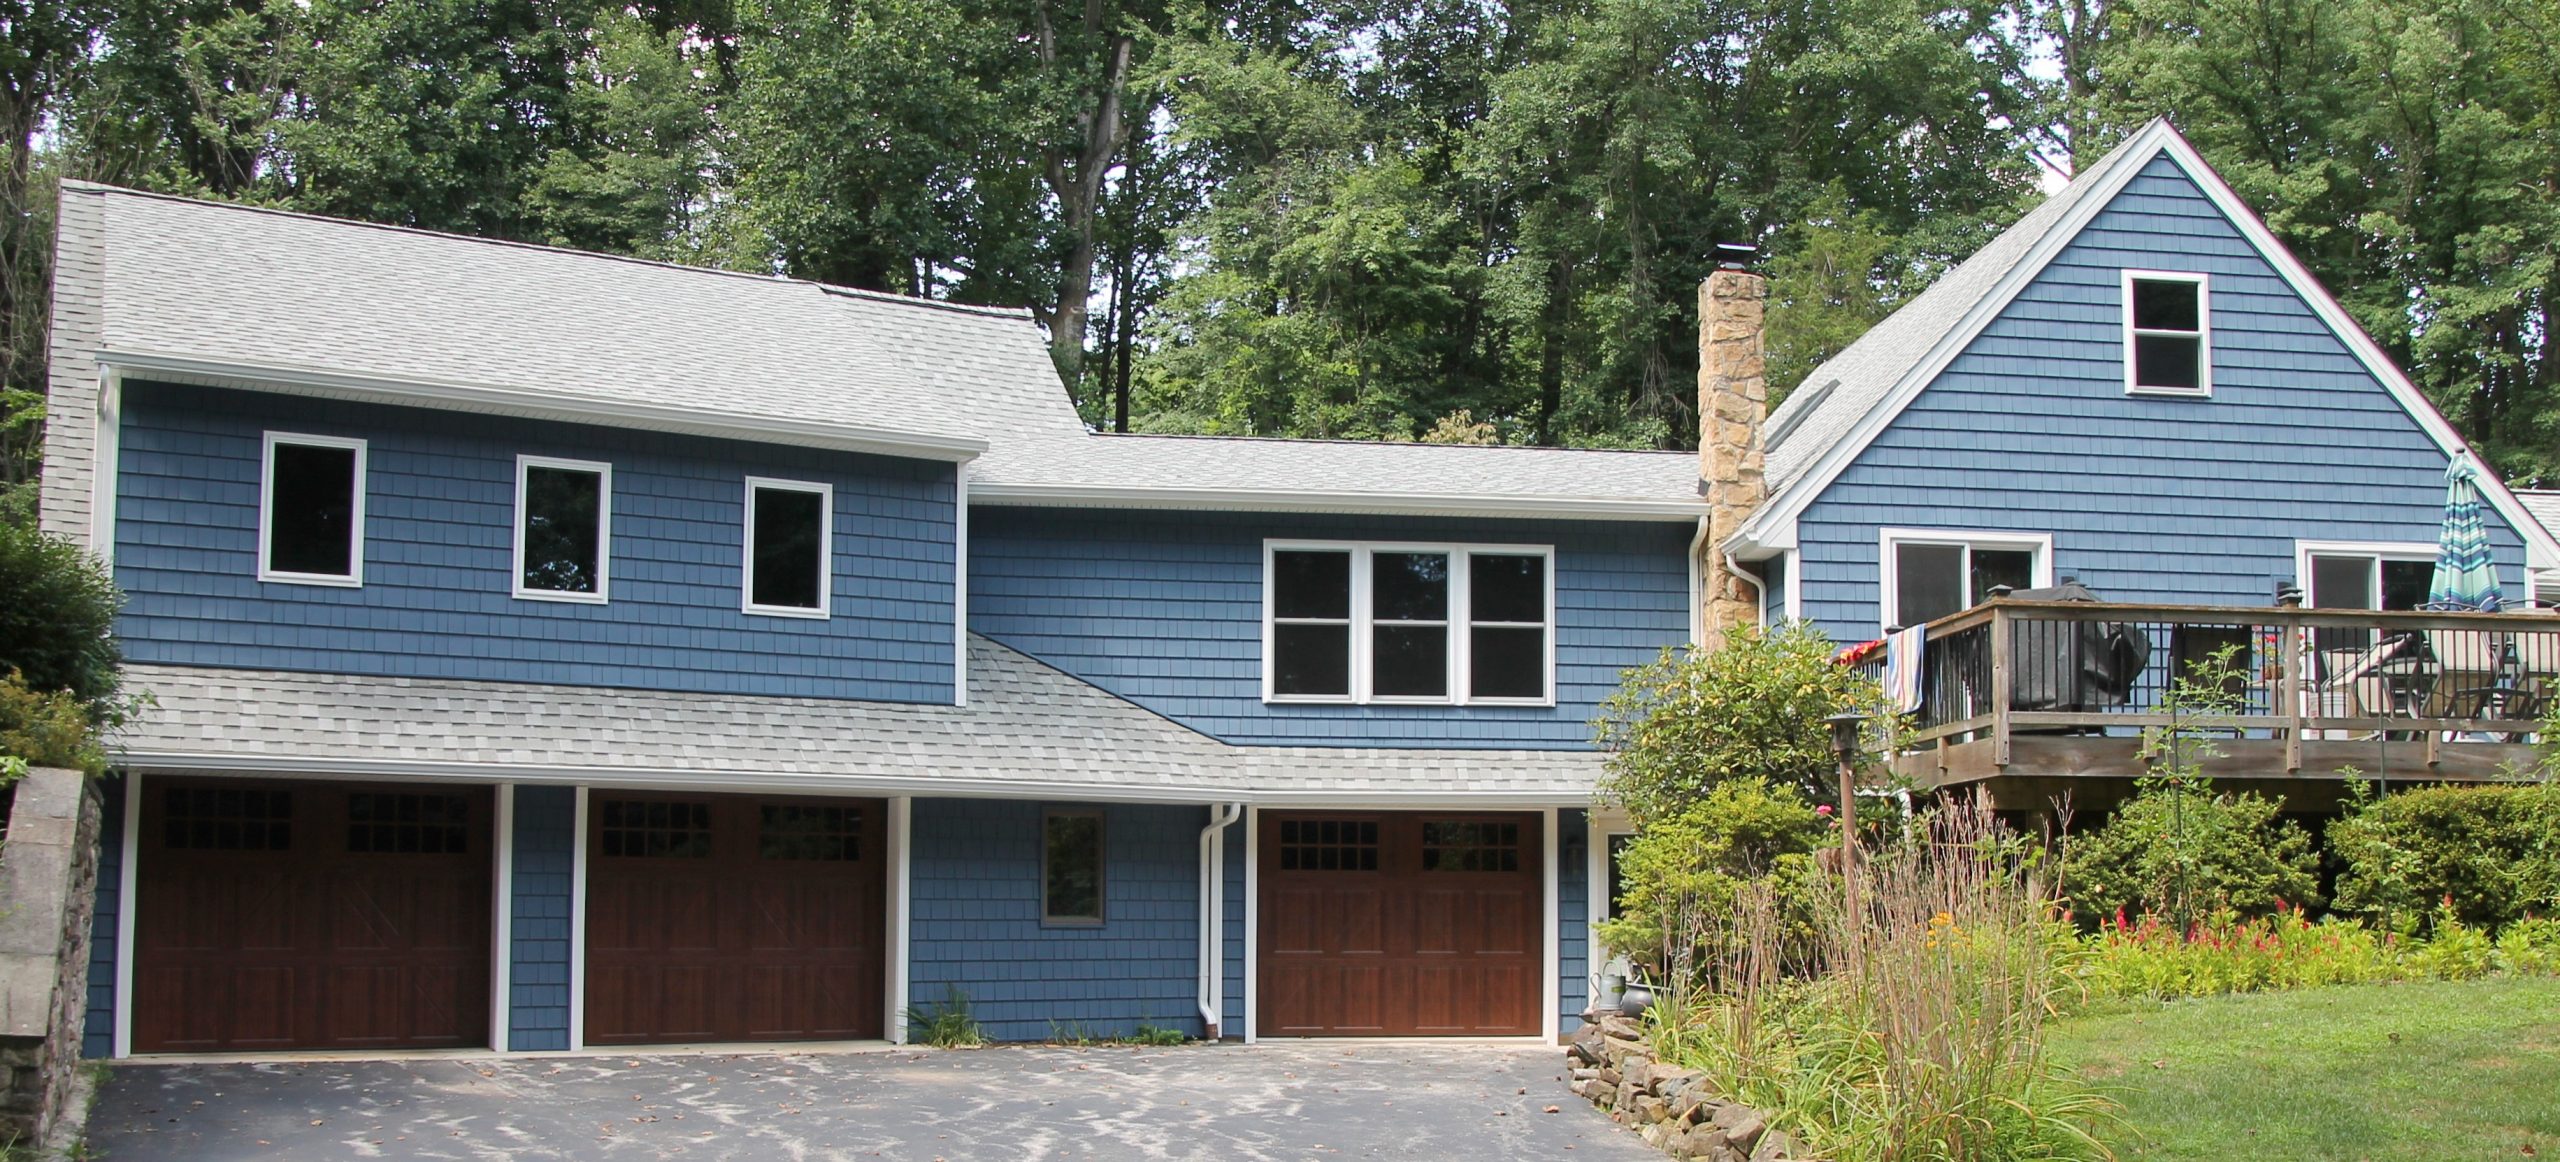 Example Siding Project